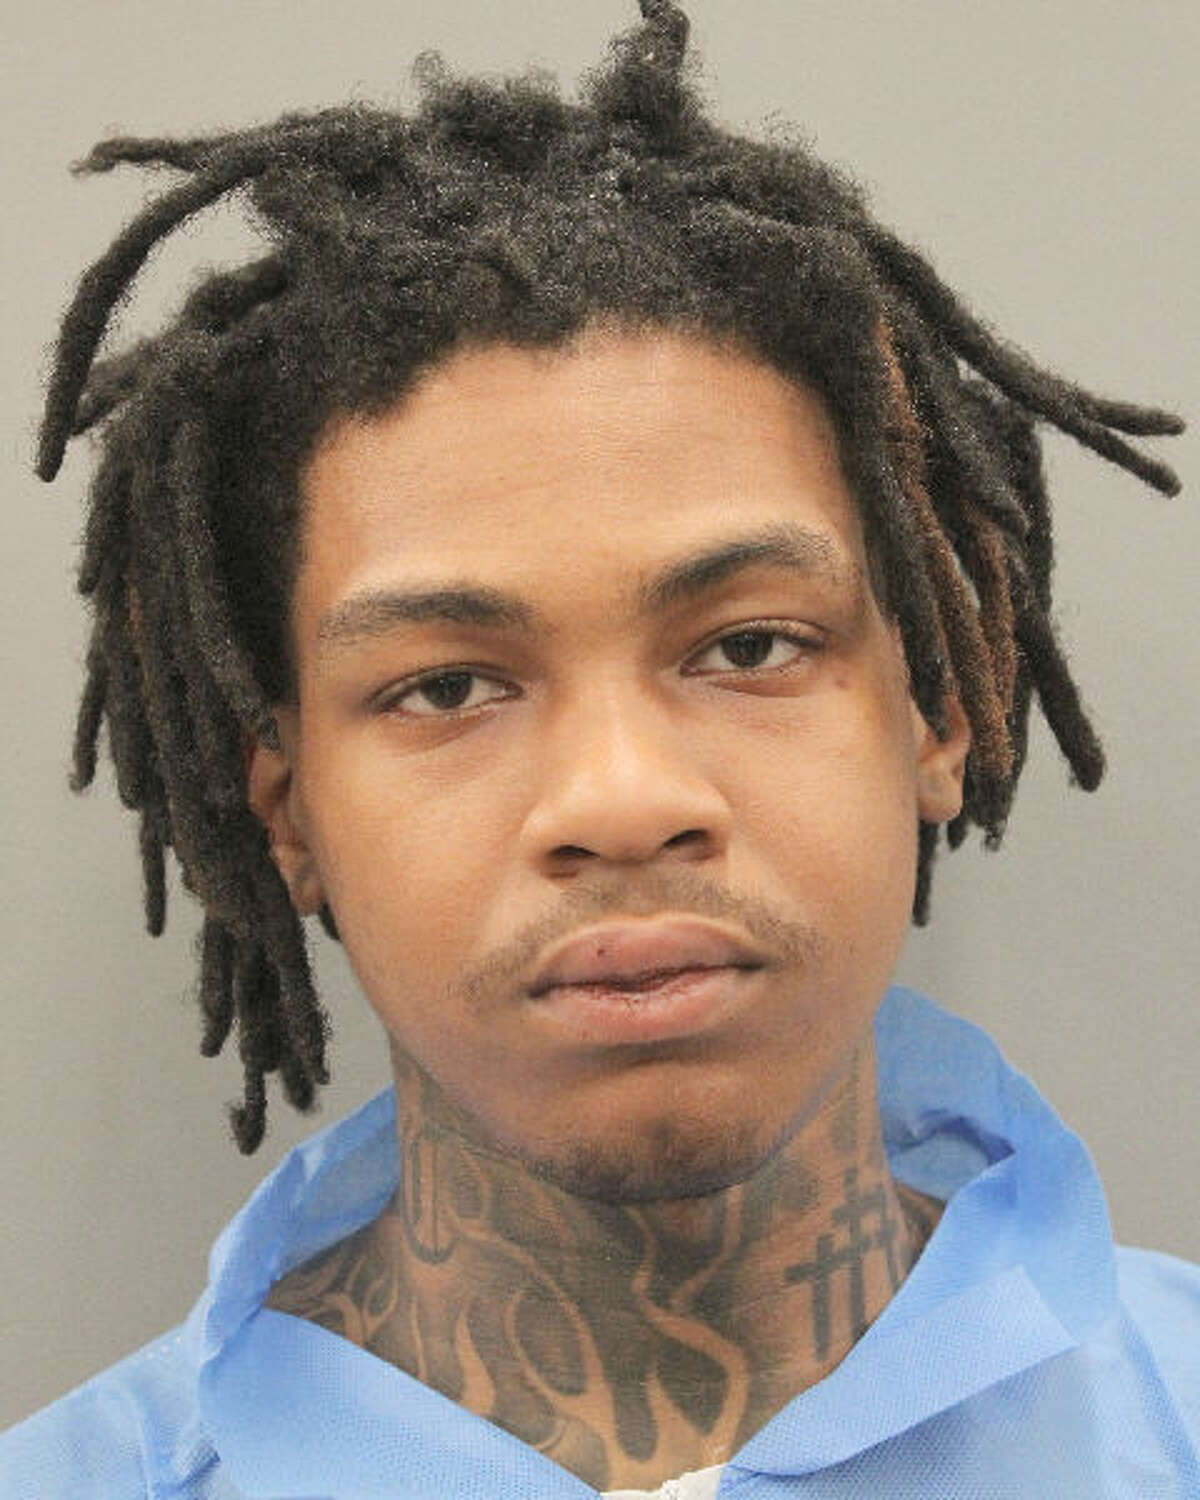 Cameron Rogers is facing a felony murder charge after a crash that killed a man early Monday in west Houston, authorities said.   